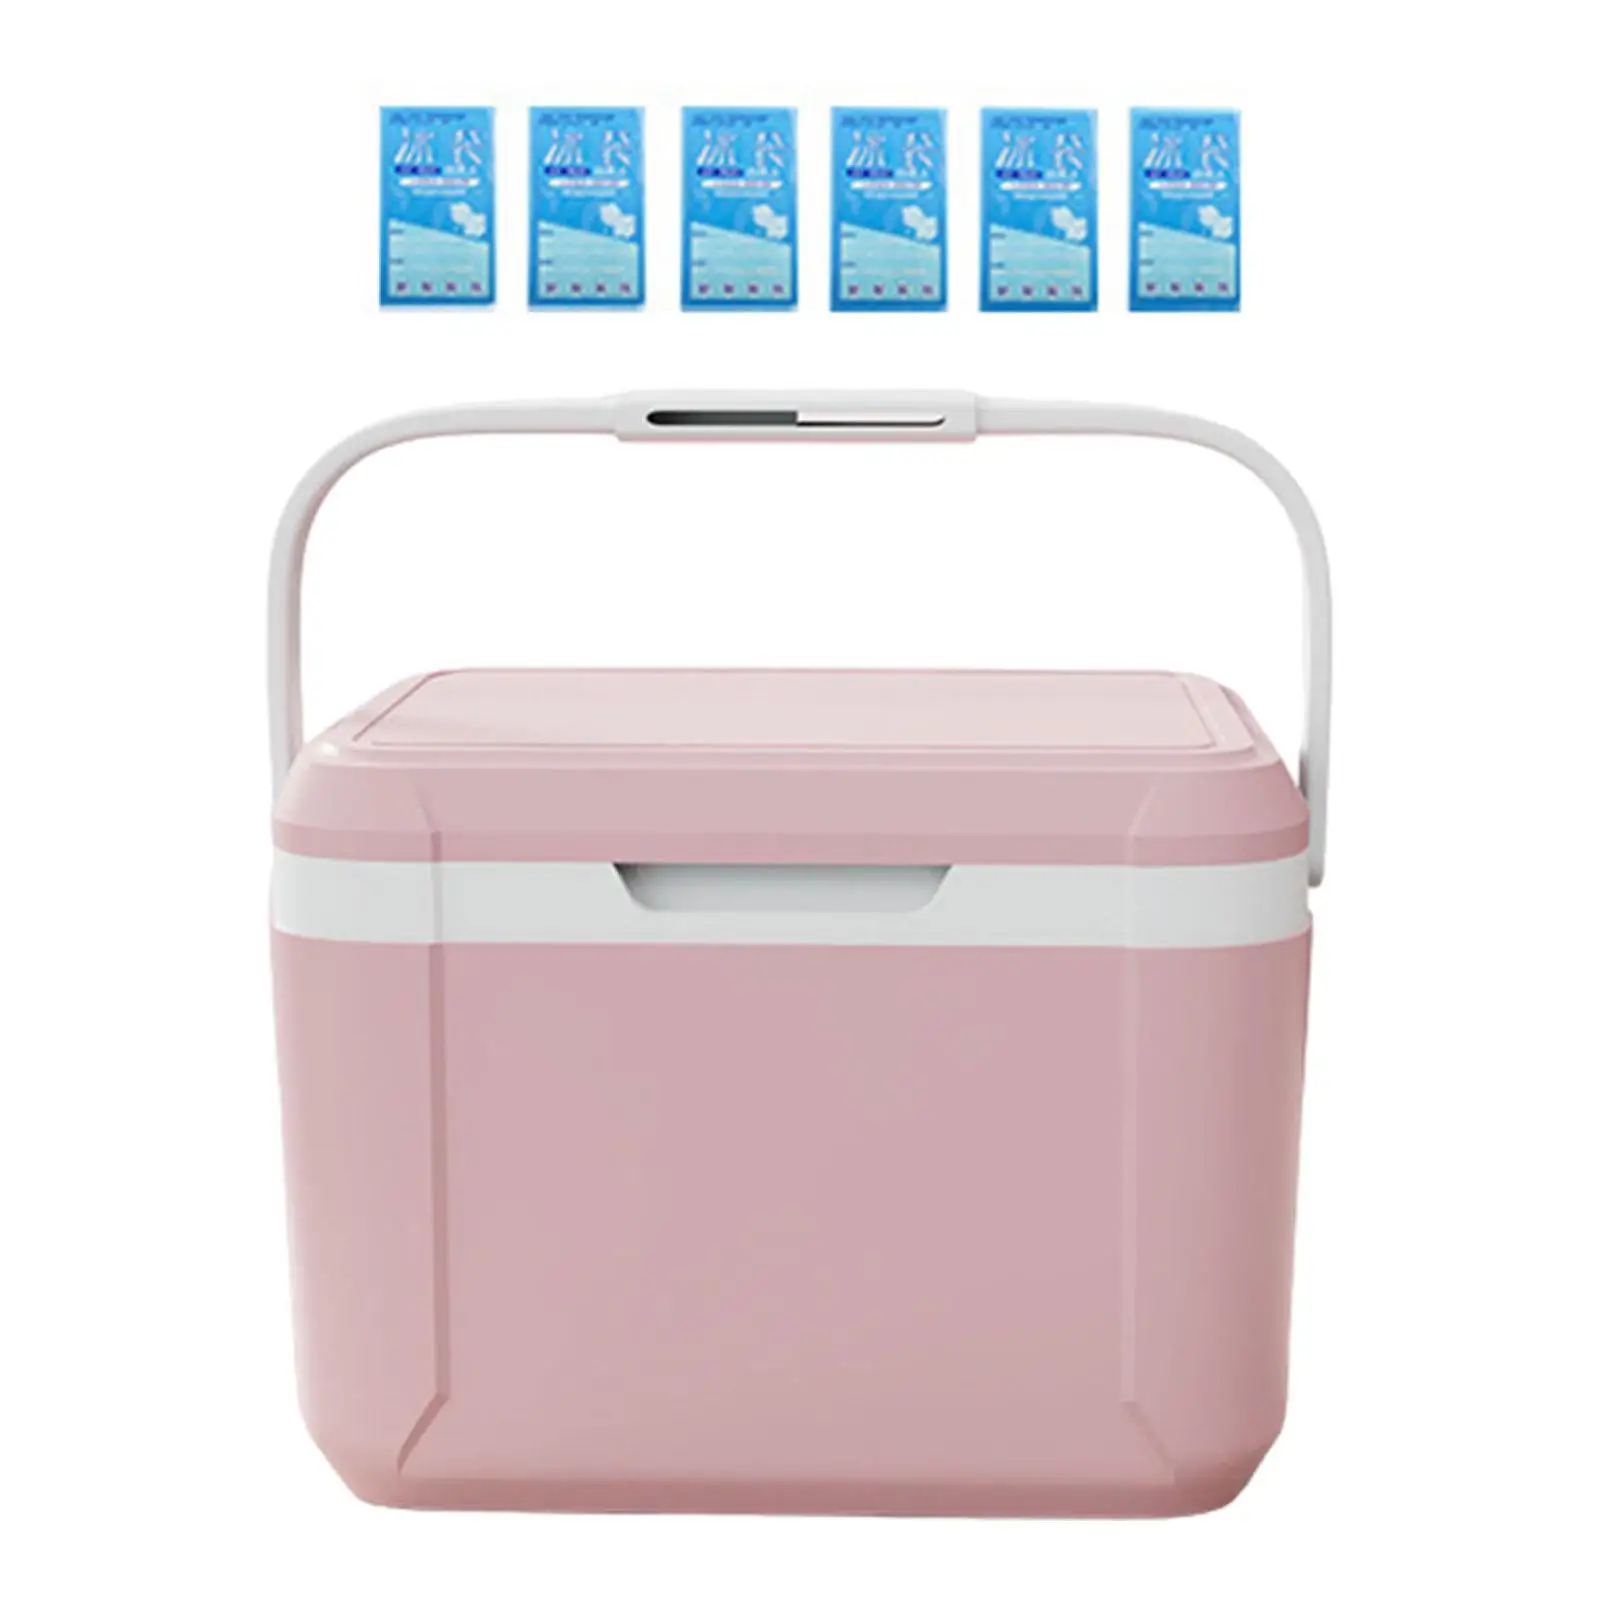 Insulated Cooler Box Car Refrigerator Household Portable Ice Bucket Ice Retention Cooler Hard Cooler for Barbecue Beach Party